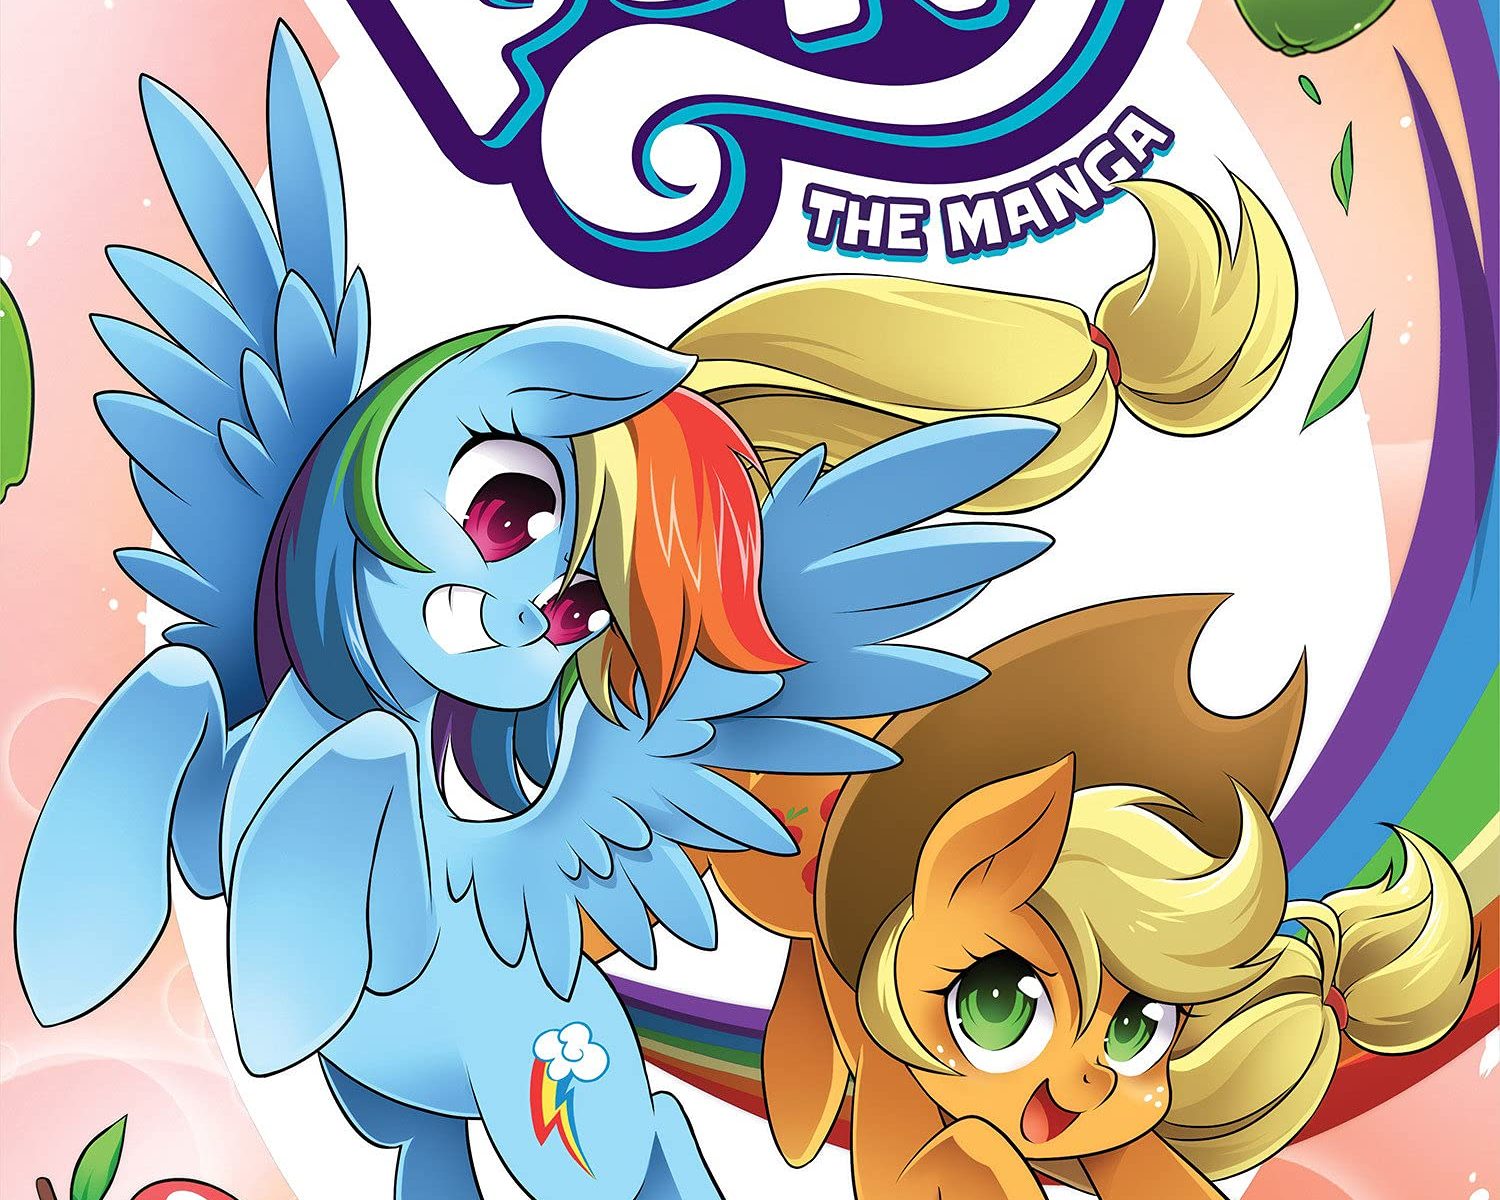 MLP A Day in the Life of Equestria Vol. 3 Manga Book 1